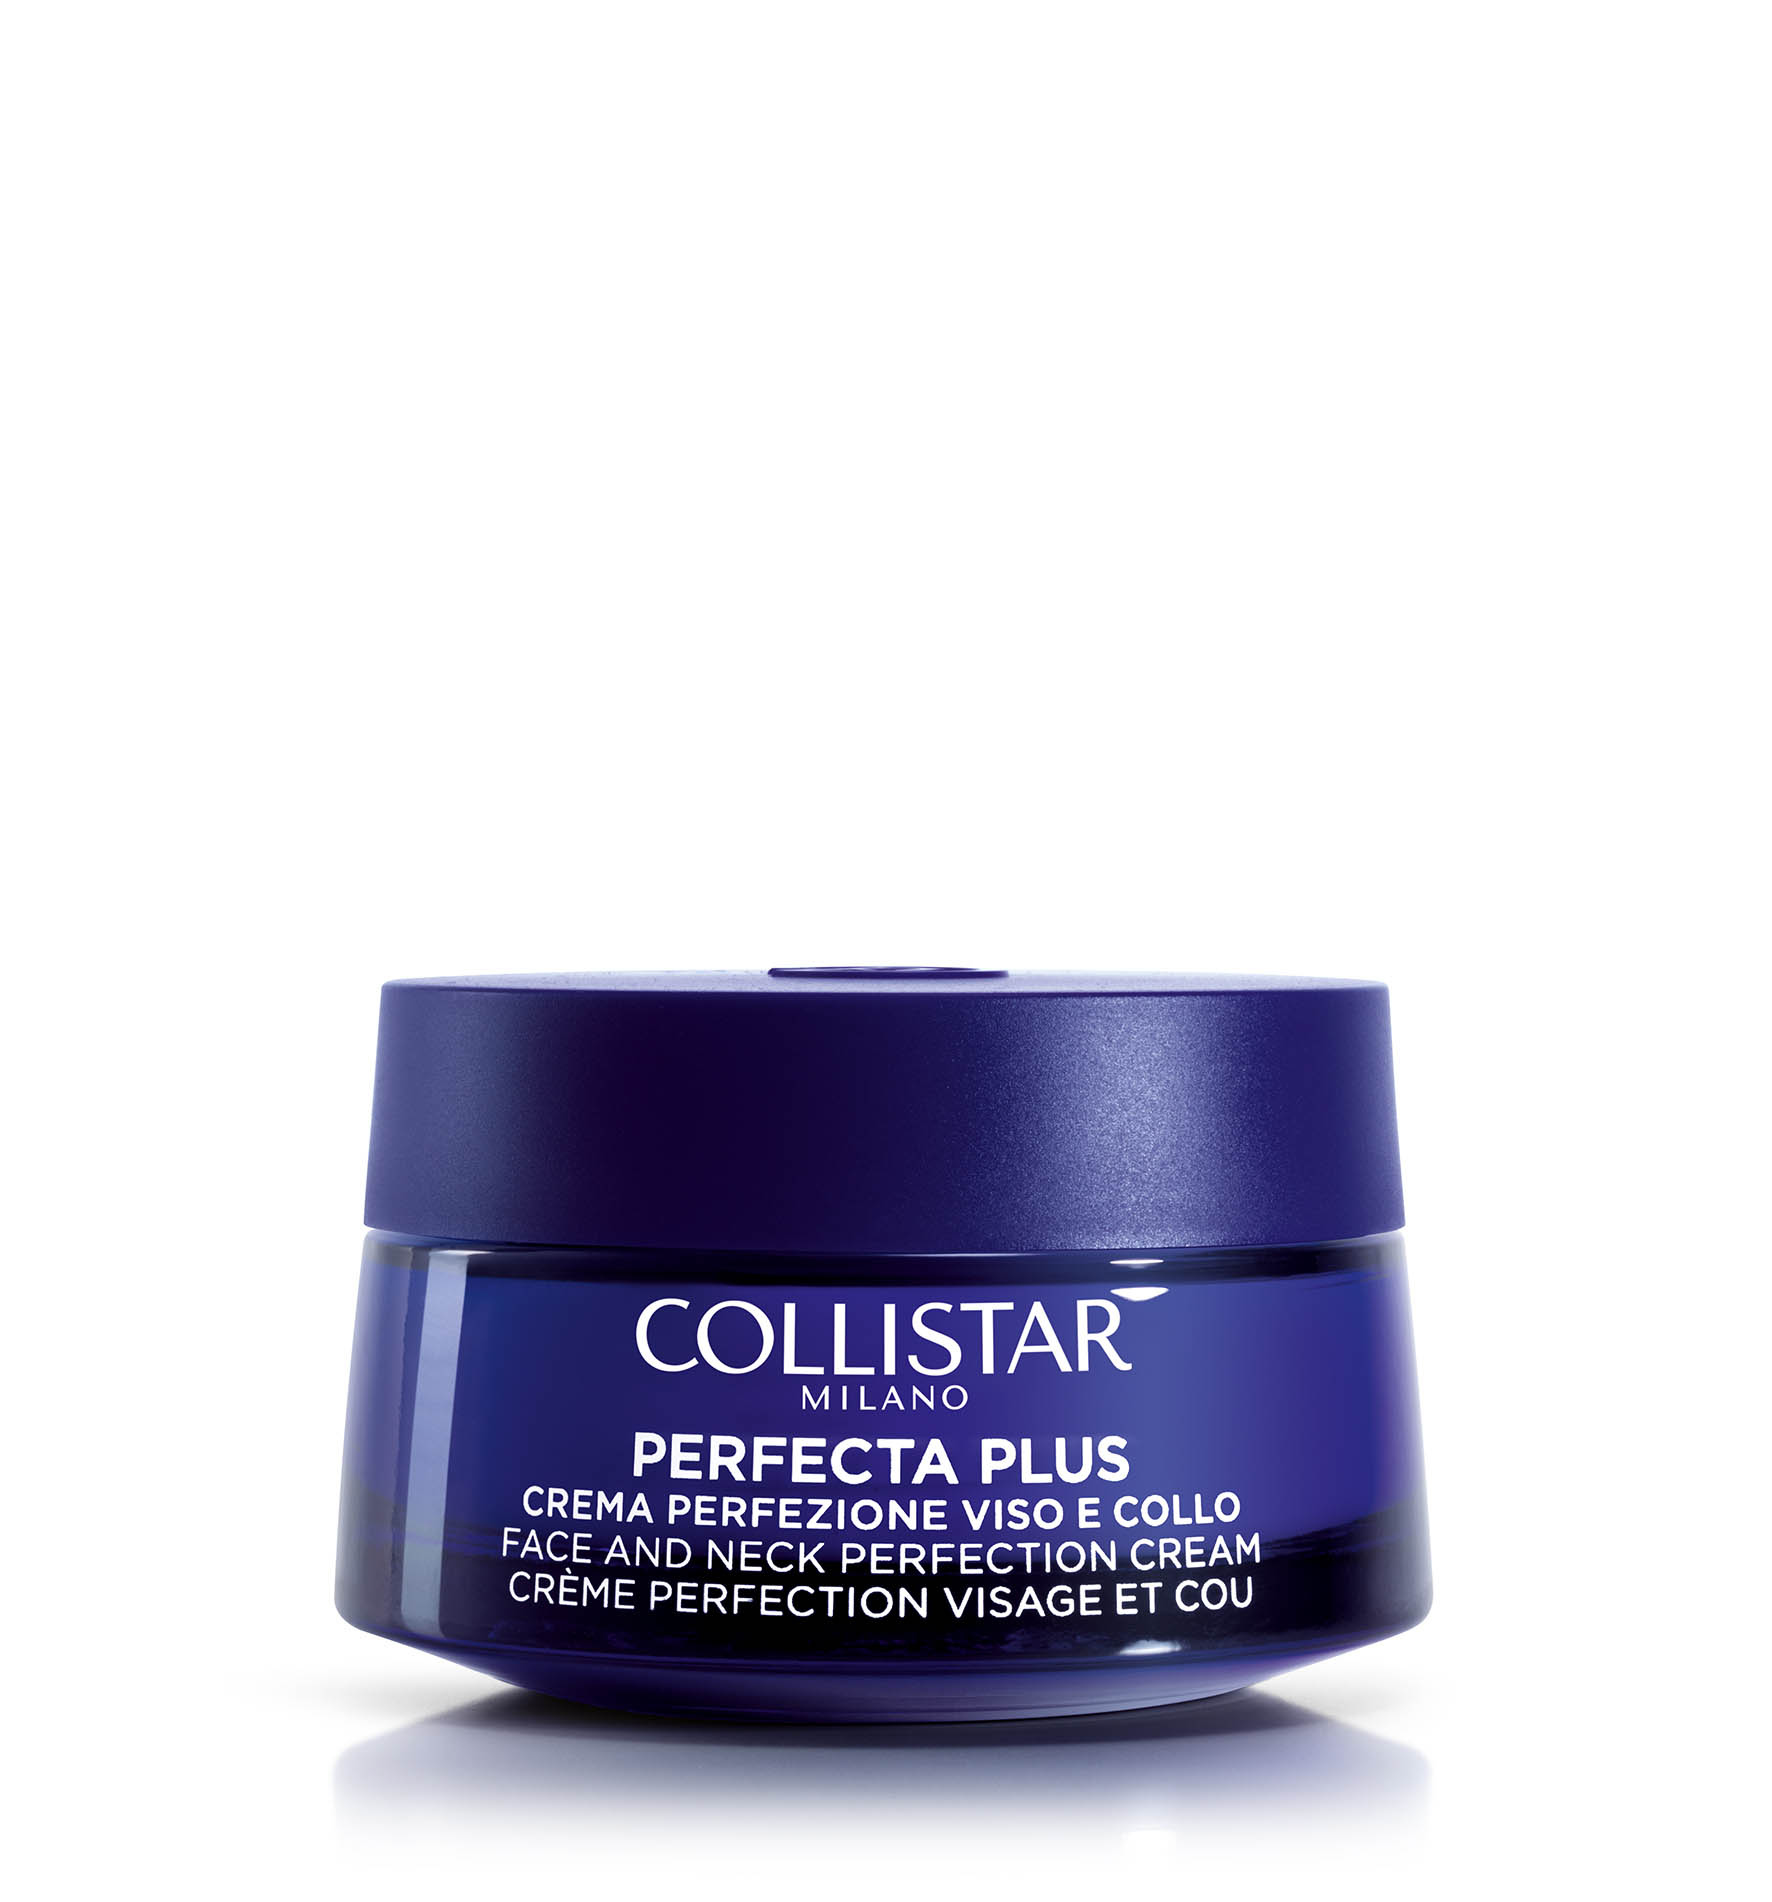 PERFECTA PLUS FACE AND NECK PERFECTION CREAM | Collistar - Shop Online Ufficiale